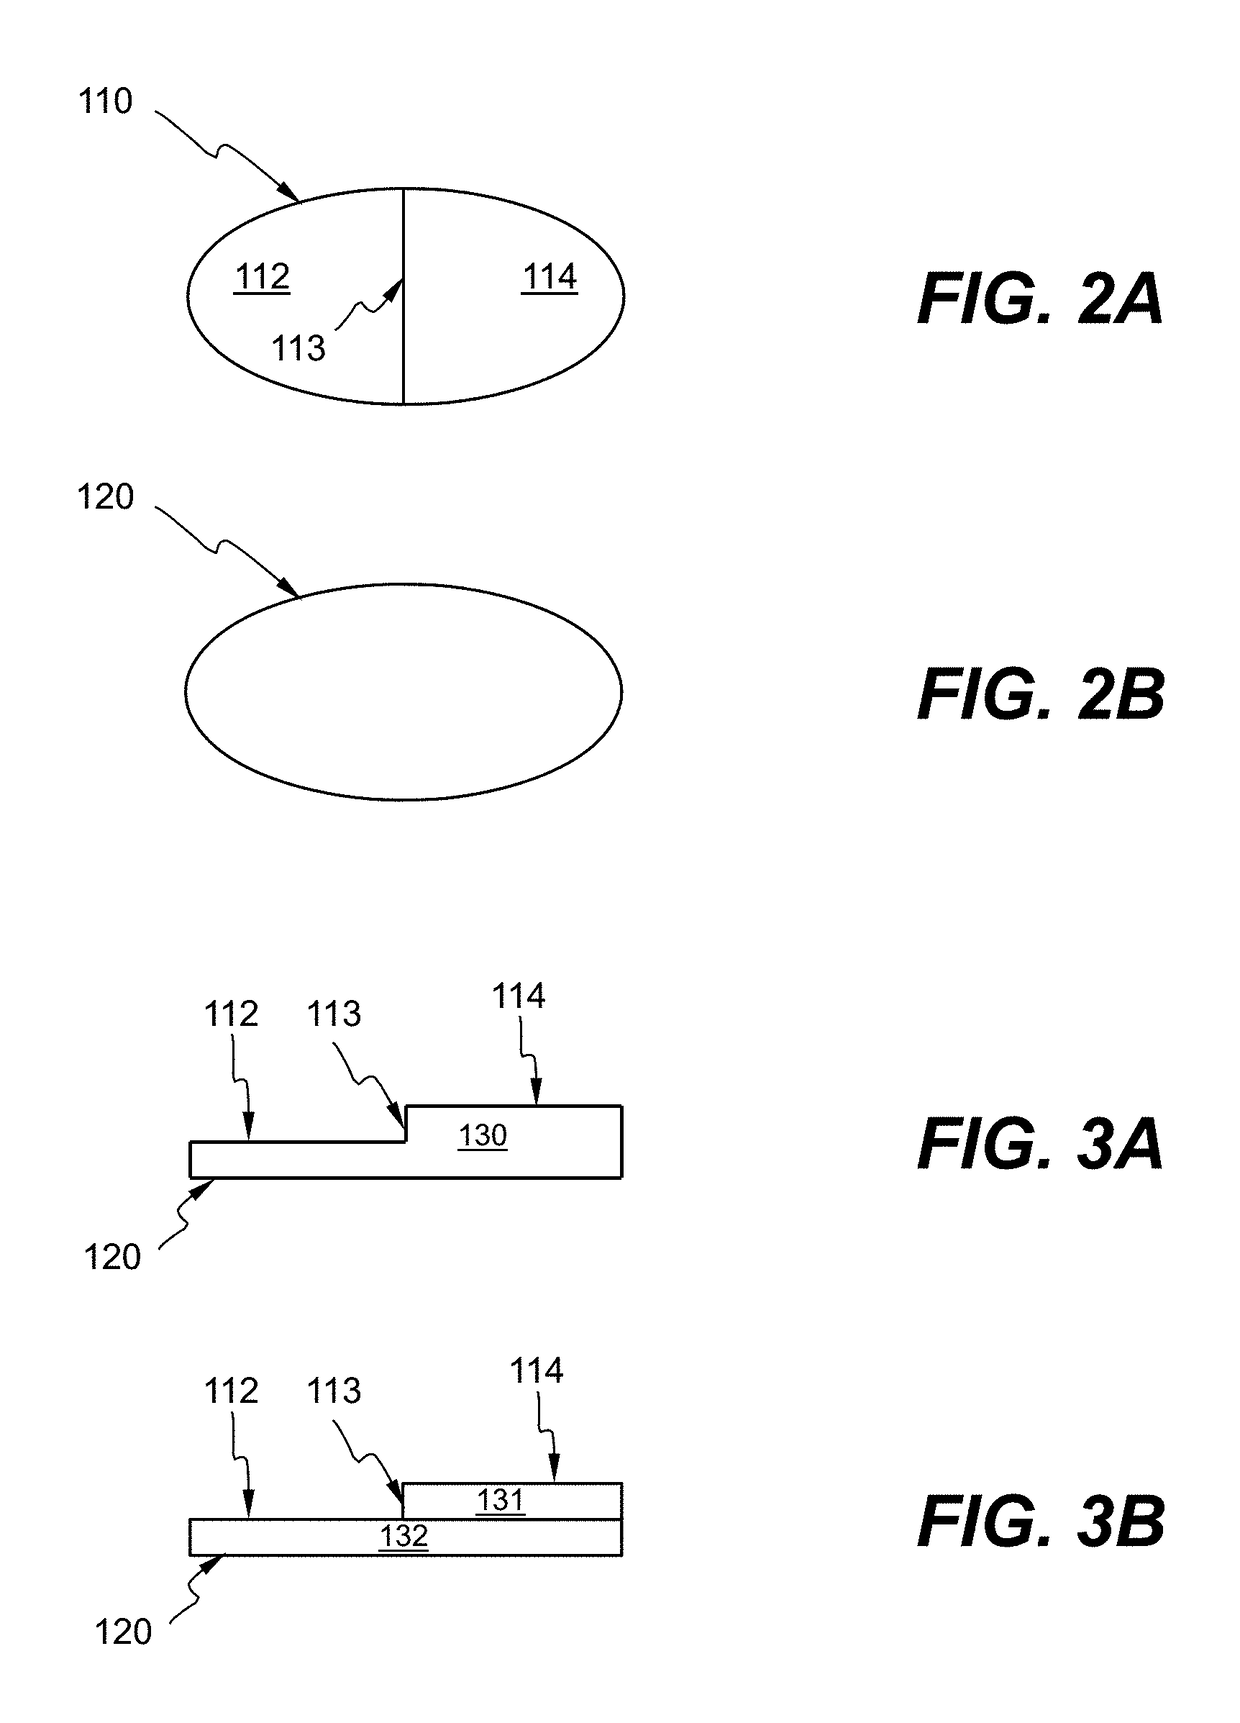 Apparatus providing teeth location guide for use with single-reed woodwind instruments